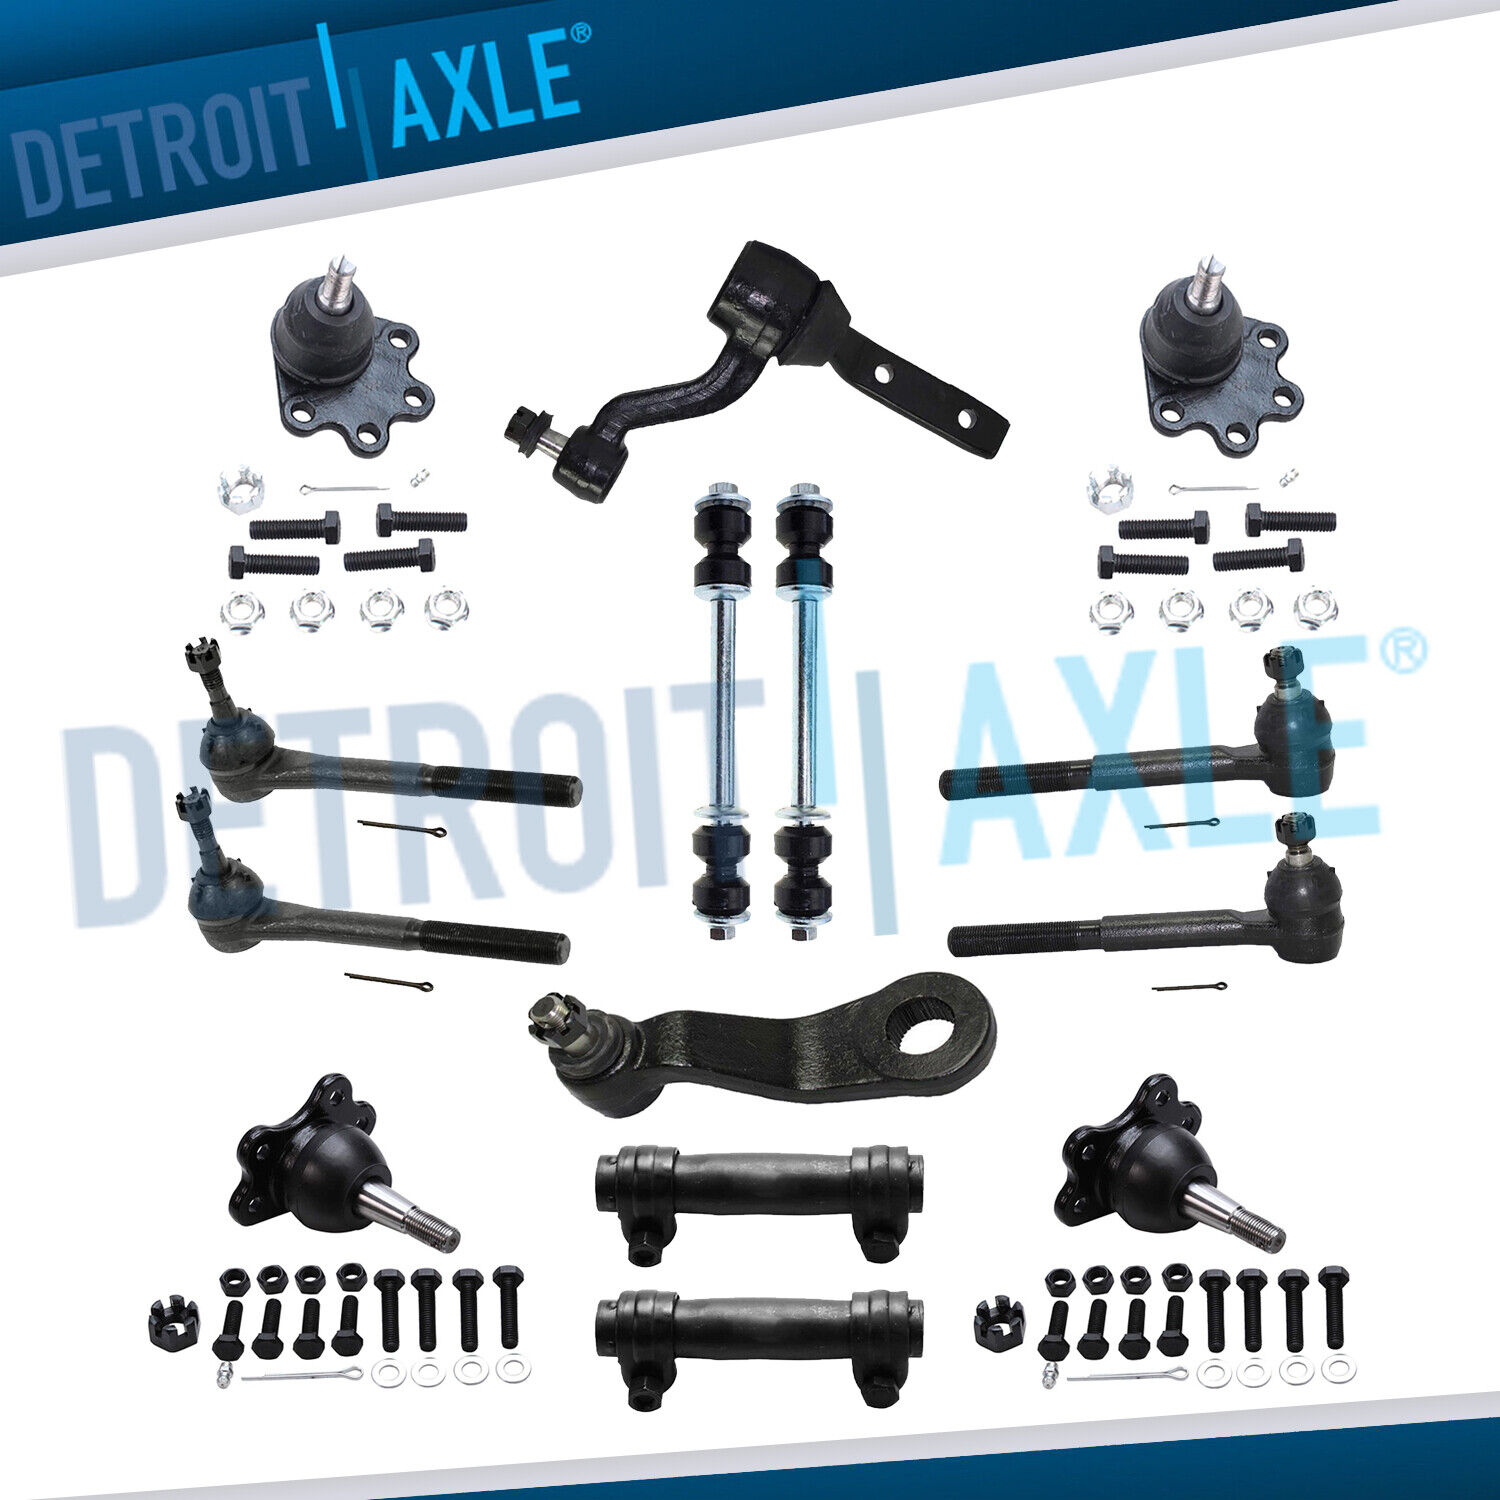 14pc Complete Front Suspension Kit for 1988 1990 1992 Chevy GMC K1500 K2500 4x4